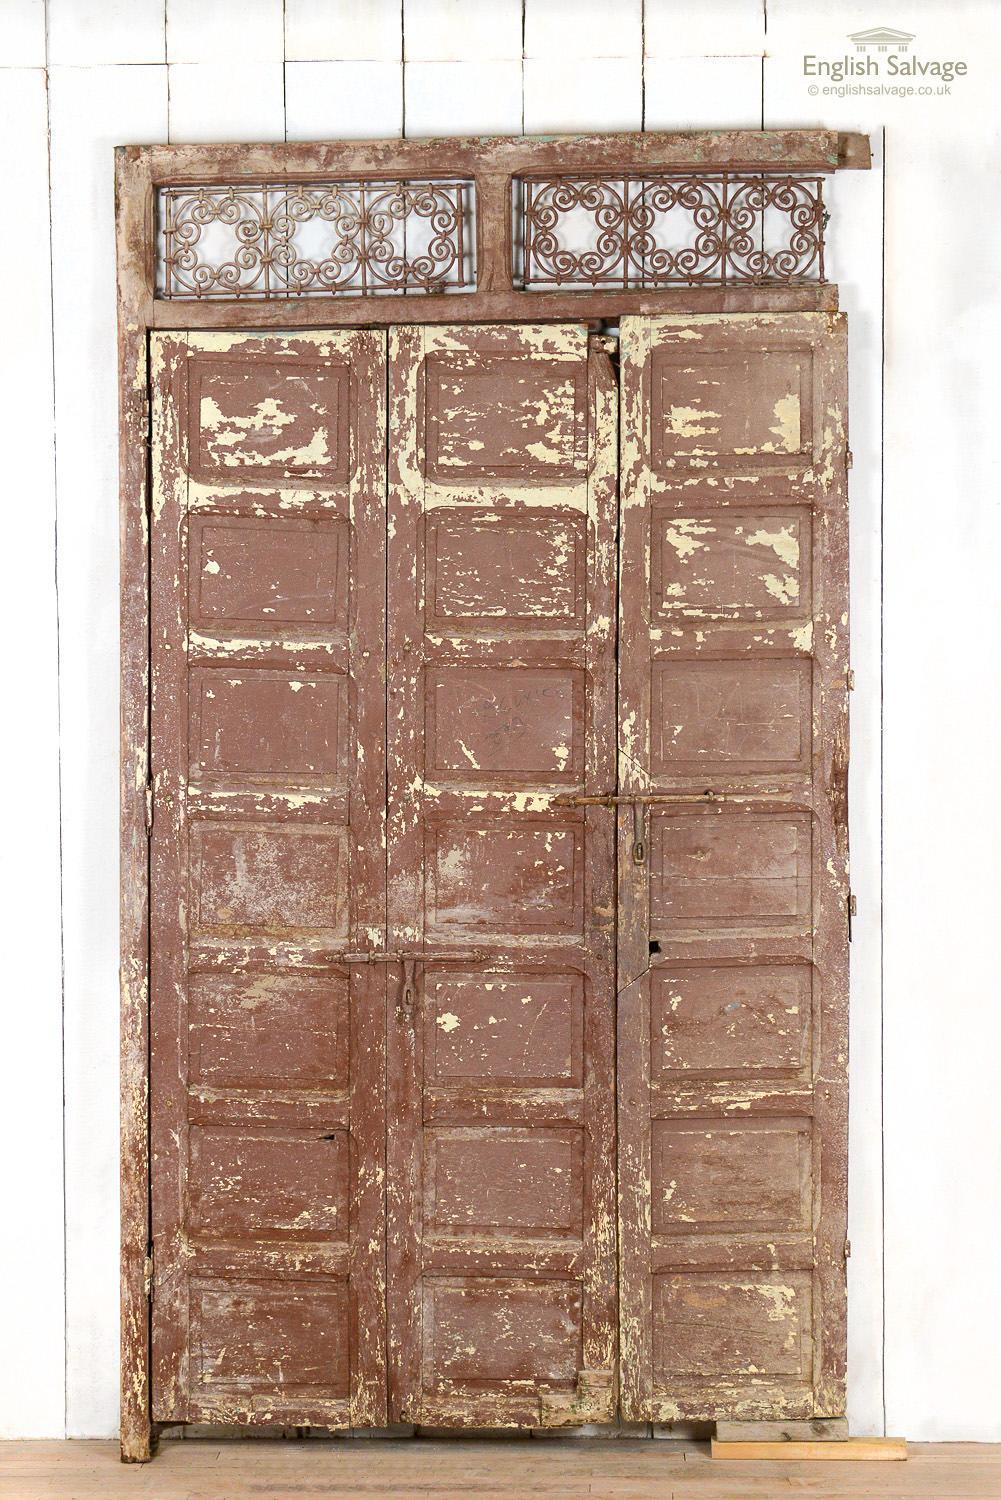 Salvaged antique panel with three multi paneled folding doors and a frame with two ornate metal grille top lights. The size of each folding door is roughly 45cm wide x 212cm high. Wear, chips and dings to doors and frame, rust to grille and the